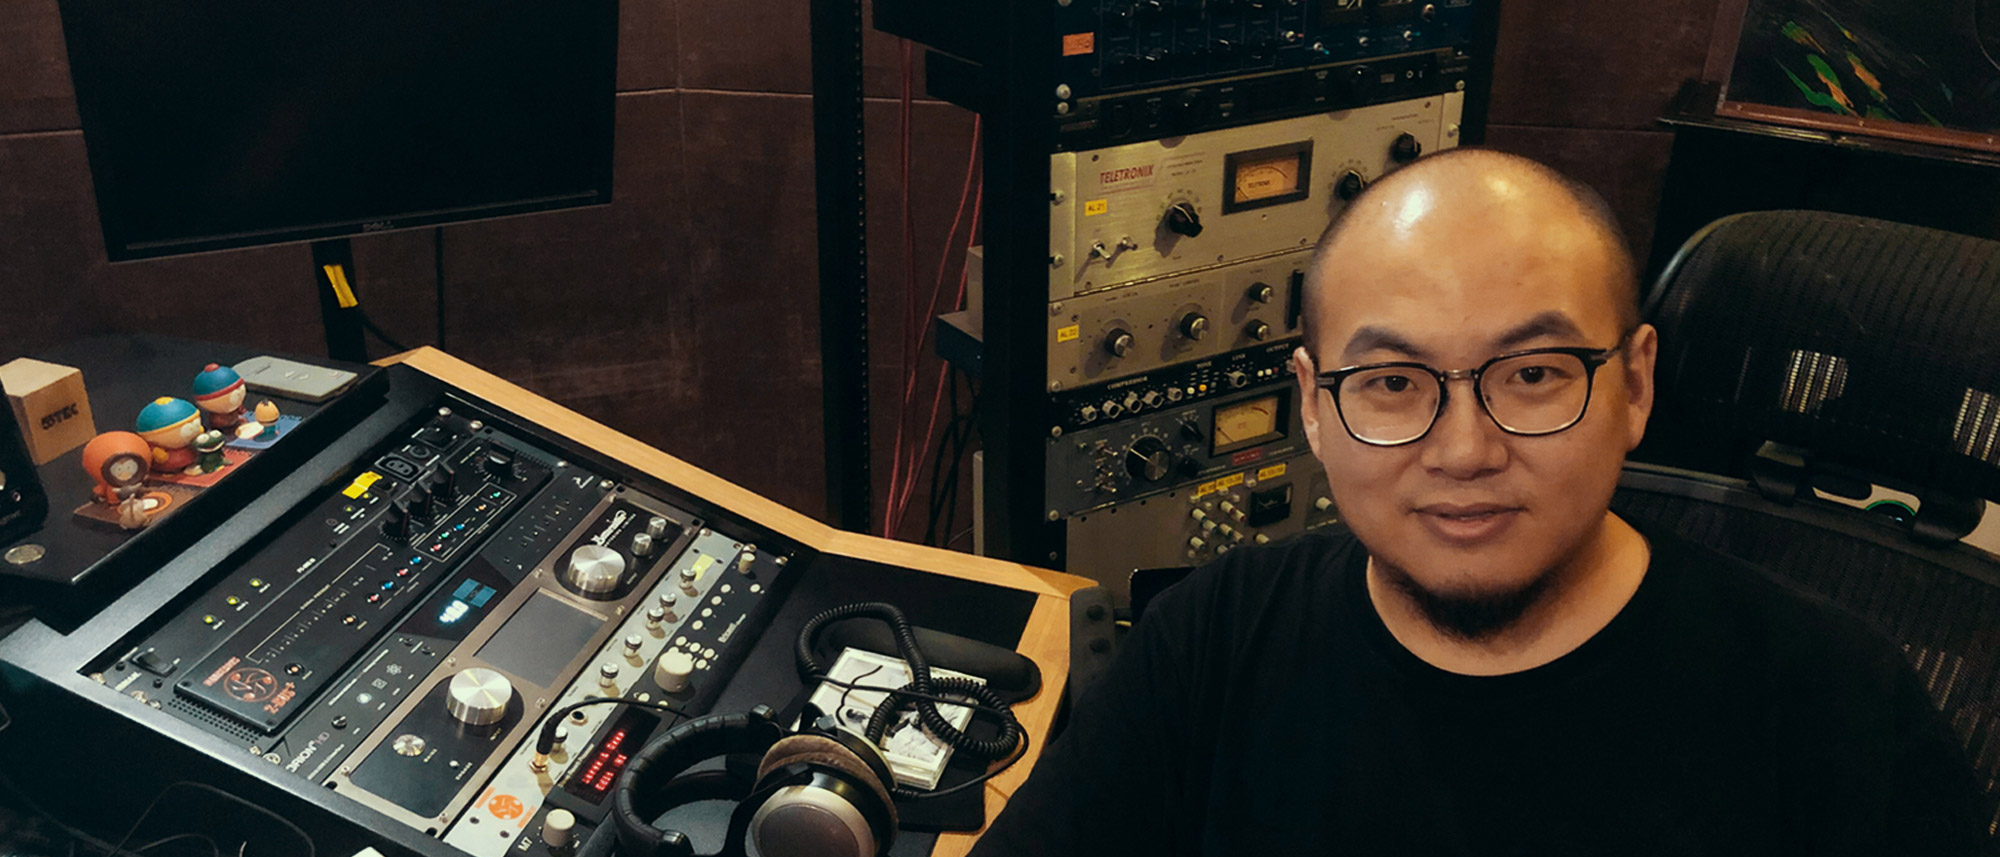 Big J on Orion32 HD – "It’s one of the most important pieces of gear in my mixing chain"